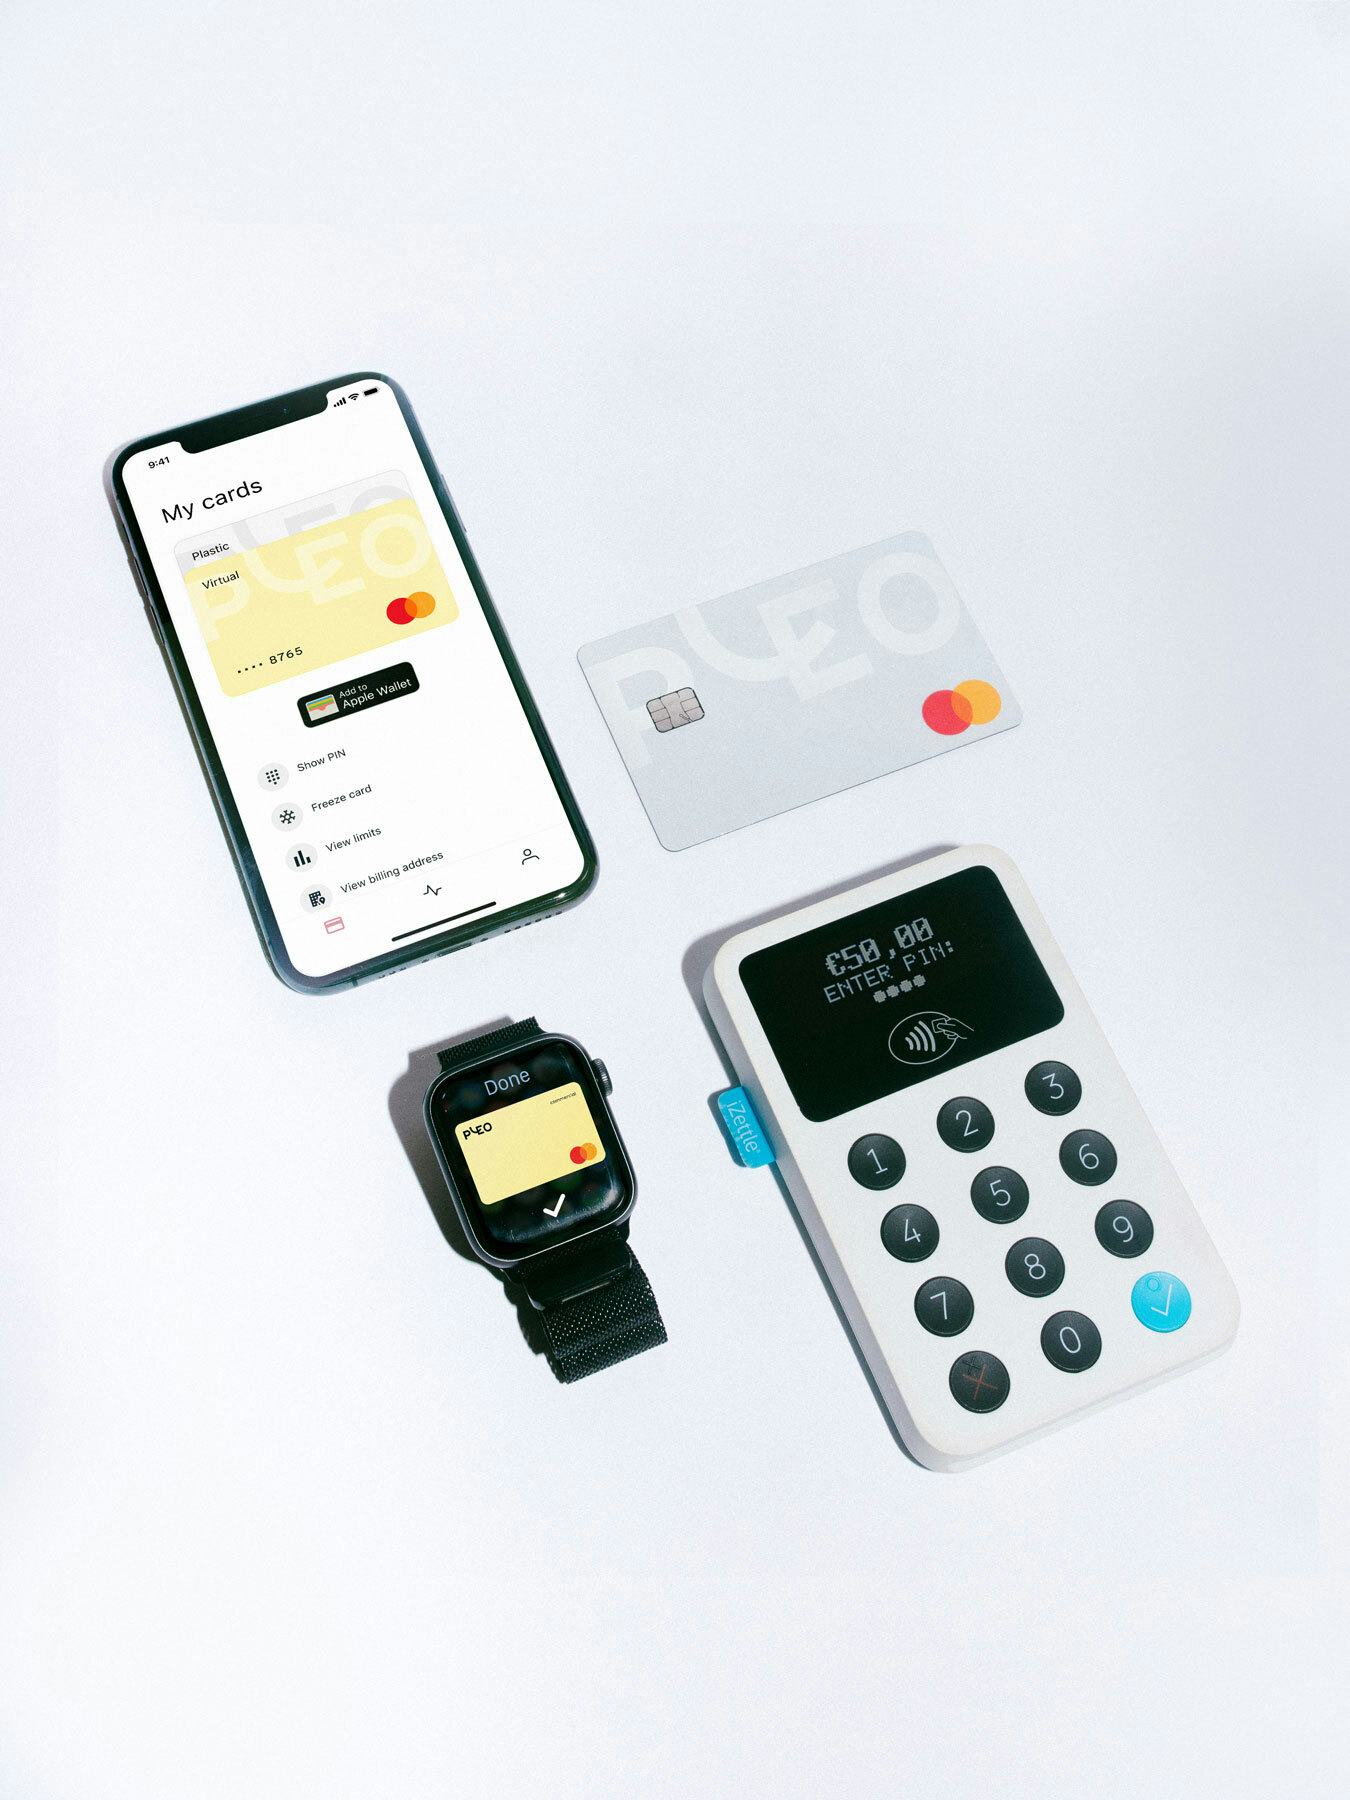 Business spending made easy with Apple Pay and Pleo